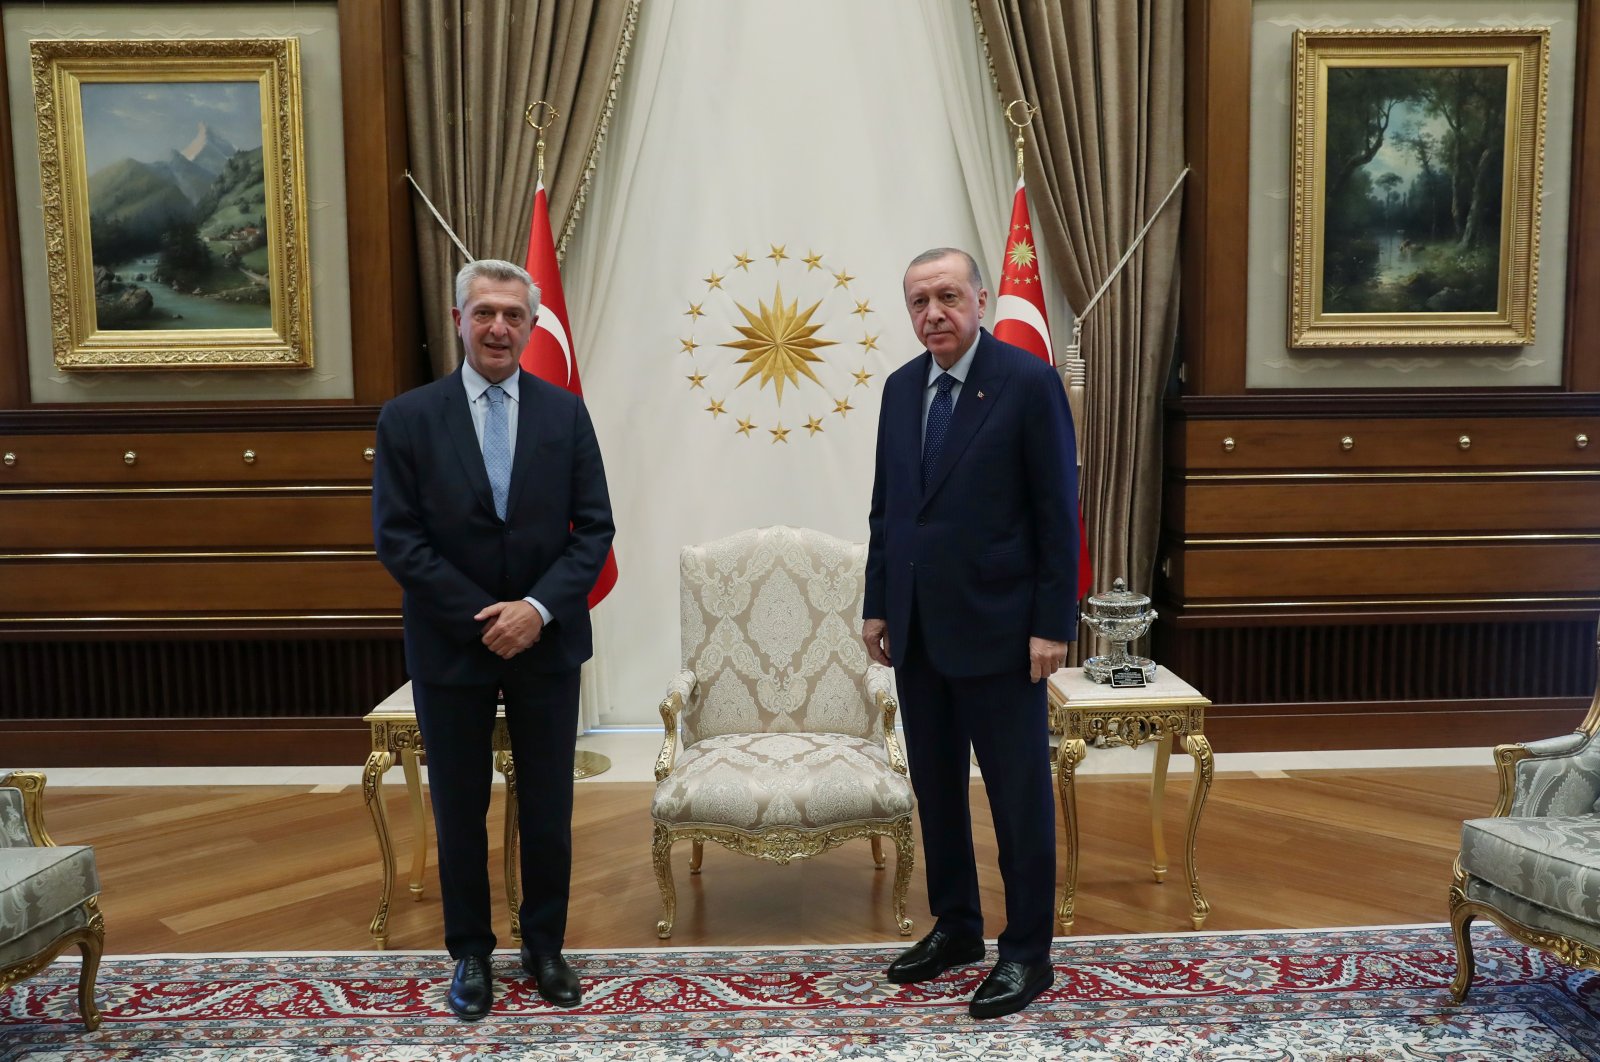 President Tayyip Erdoğan meets with United Nations High Commissioner for Refugees Filippo Grandi in Ankara, Turkey, Sept. 8, 2021. (Presidential Press Office Handout via Reuters)